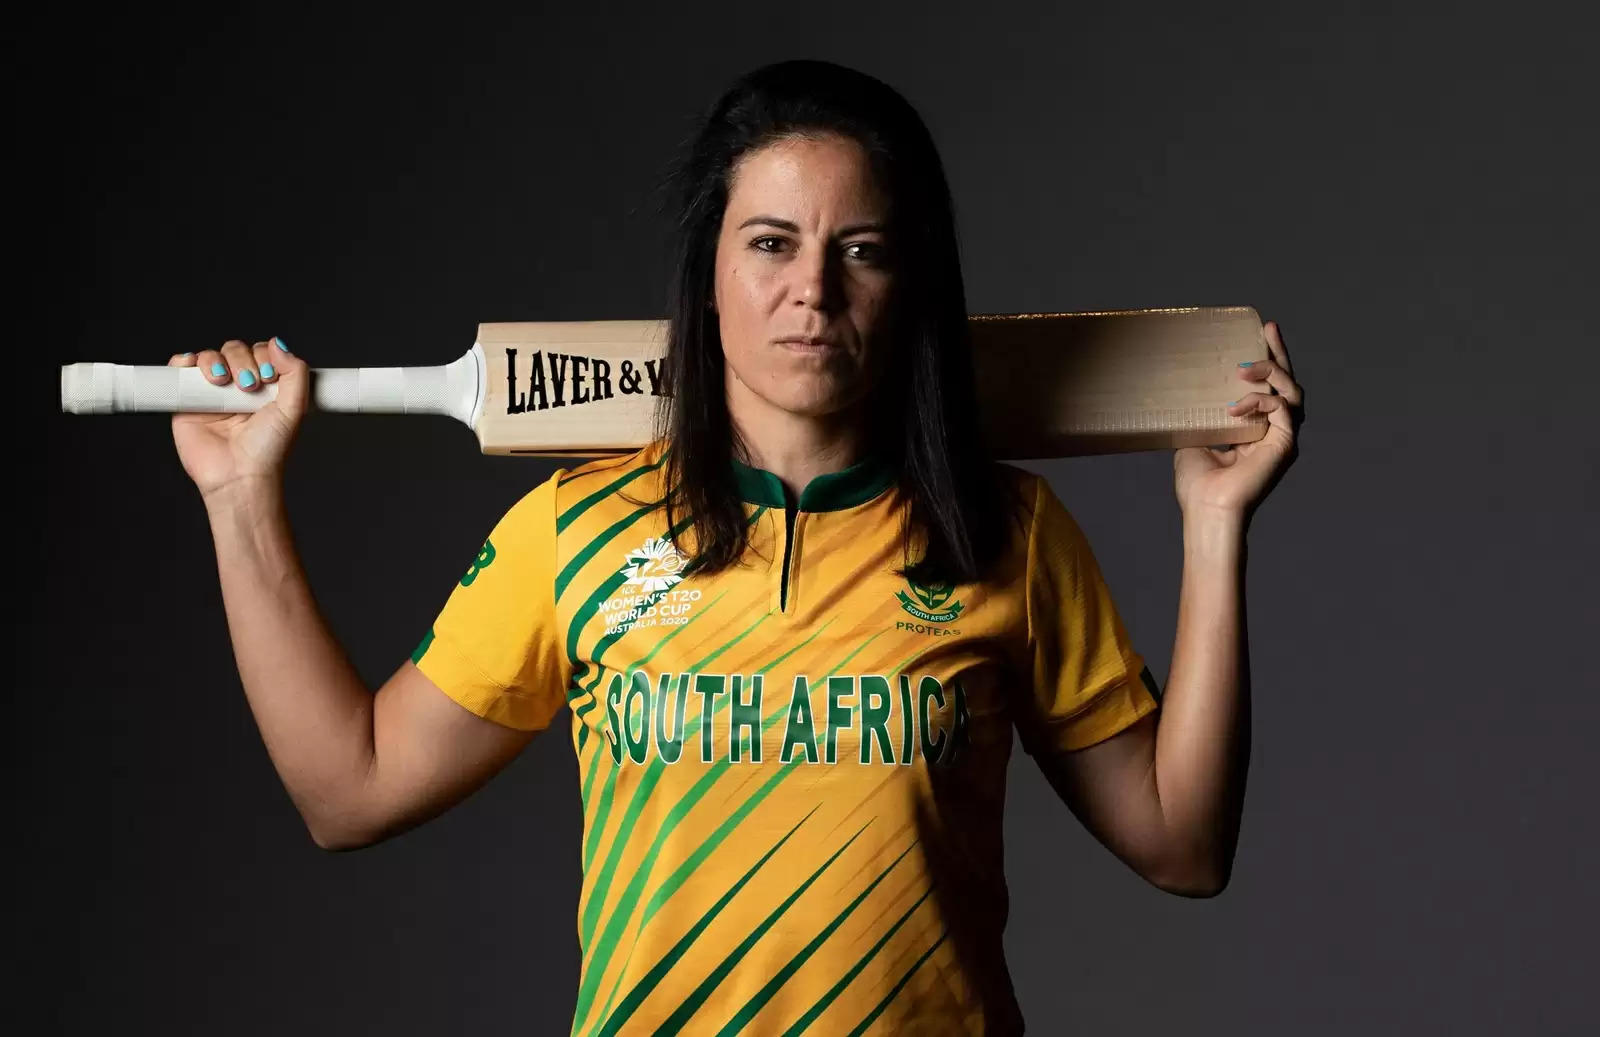 IN-W vs SA-W Dream11 Team Prediction: India Women vs South Africa Women Best Fantasy Cricket Tips for 1st ODI, Playing XI, Team & Top Player Picks